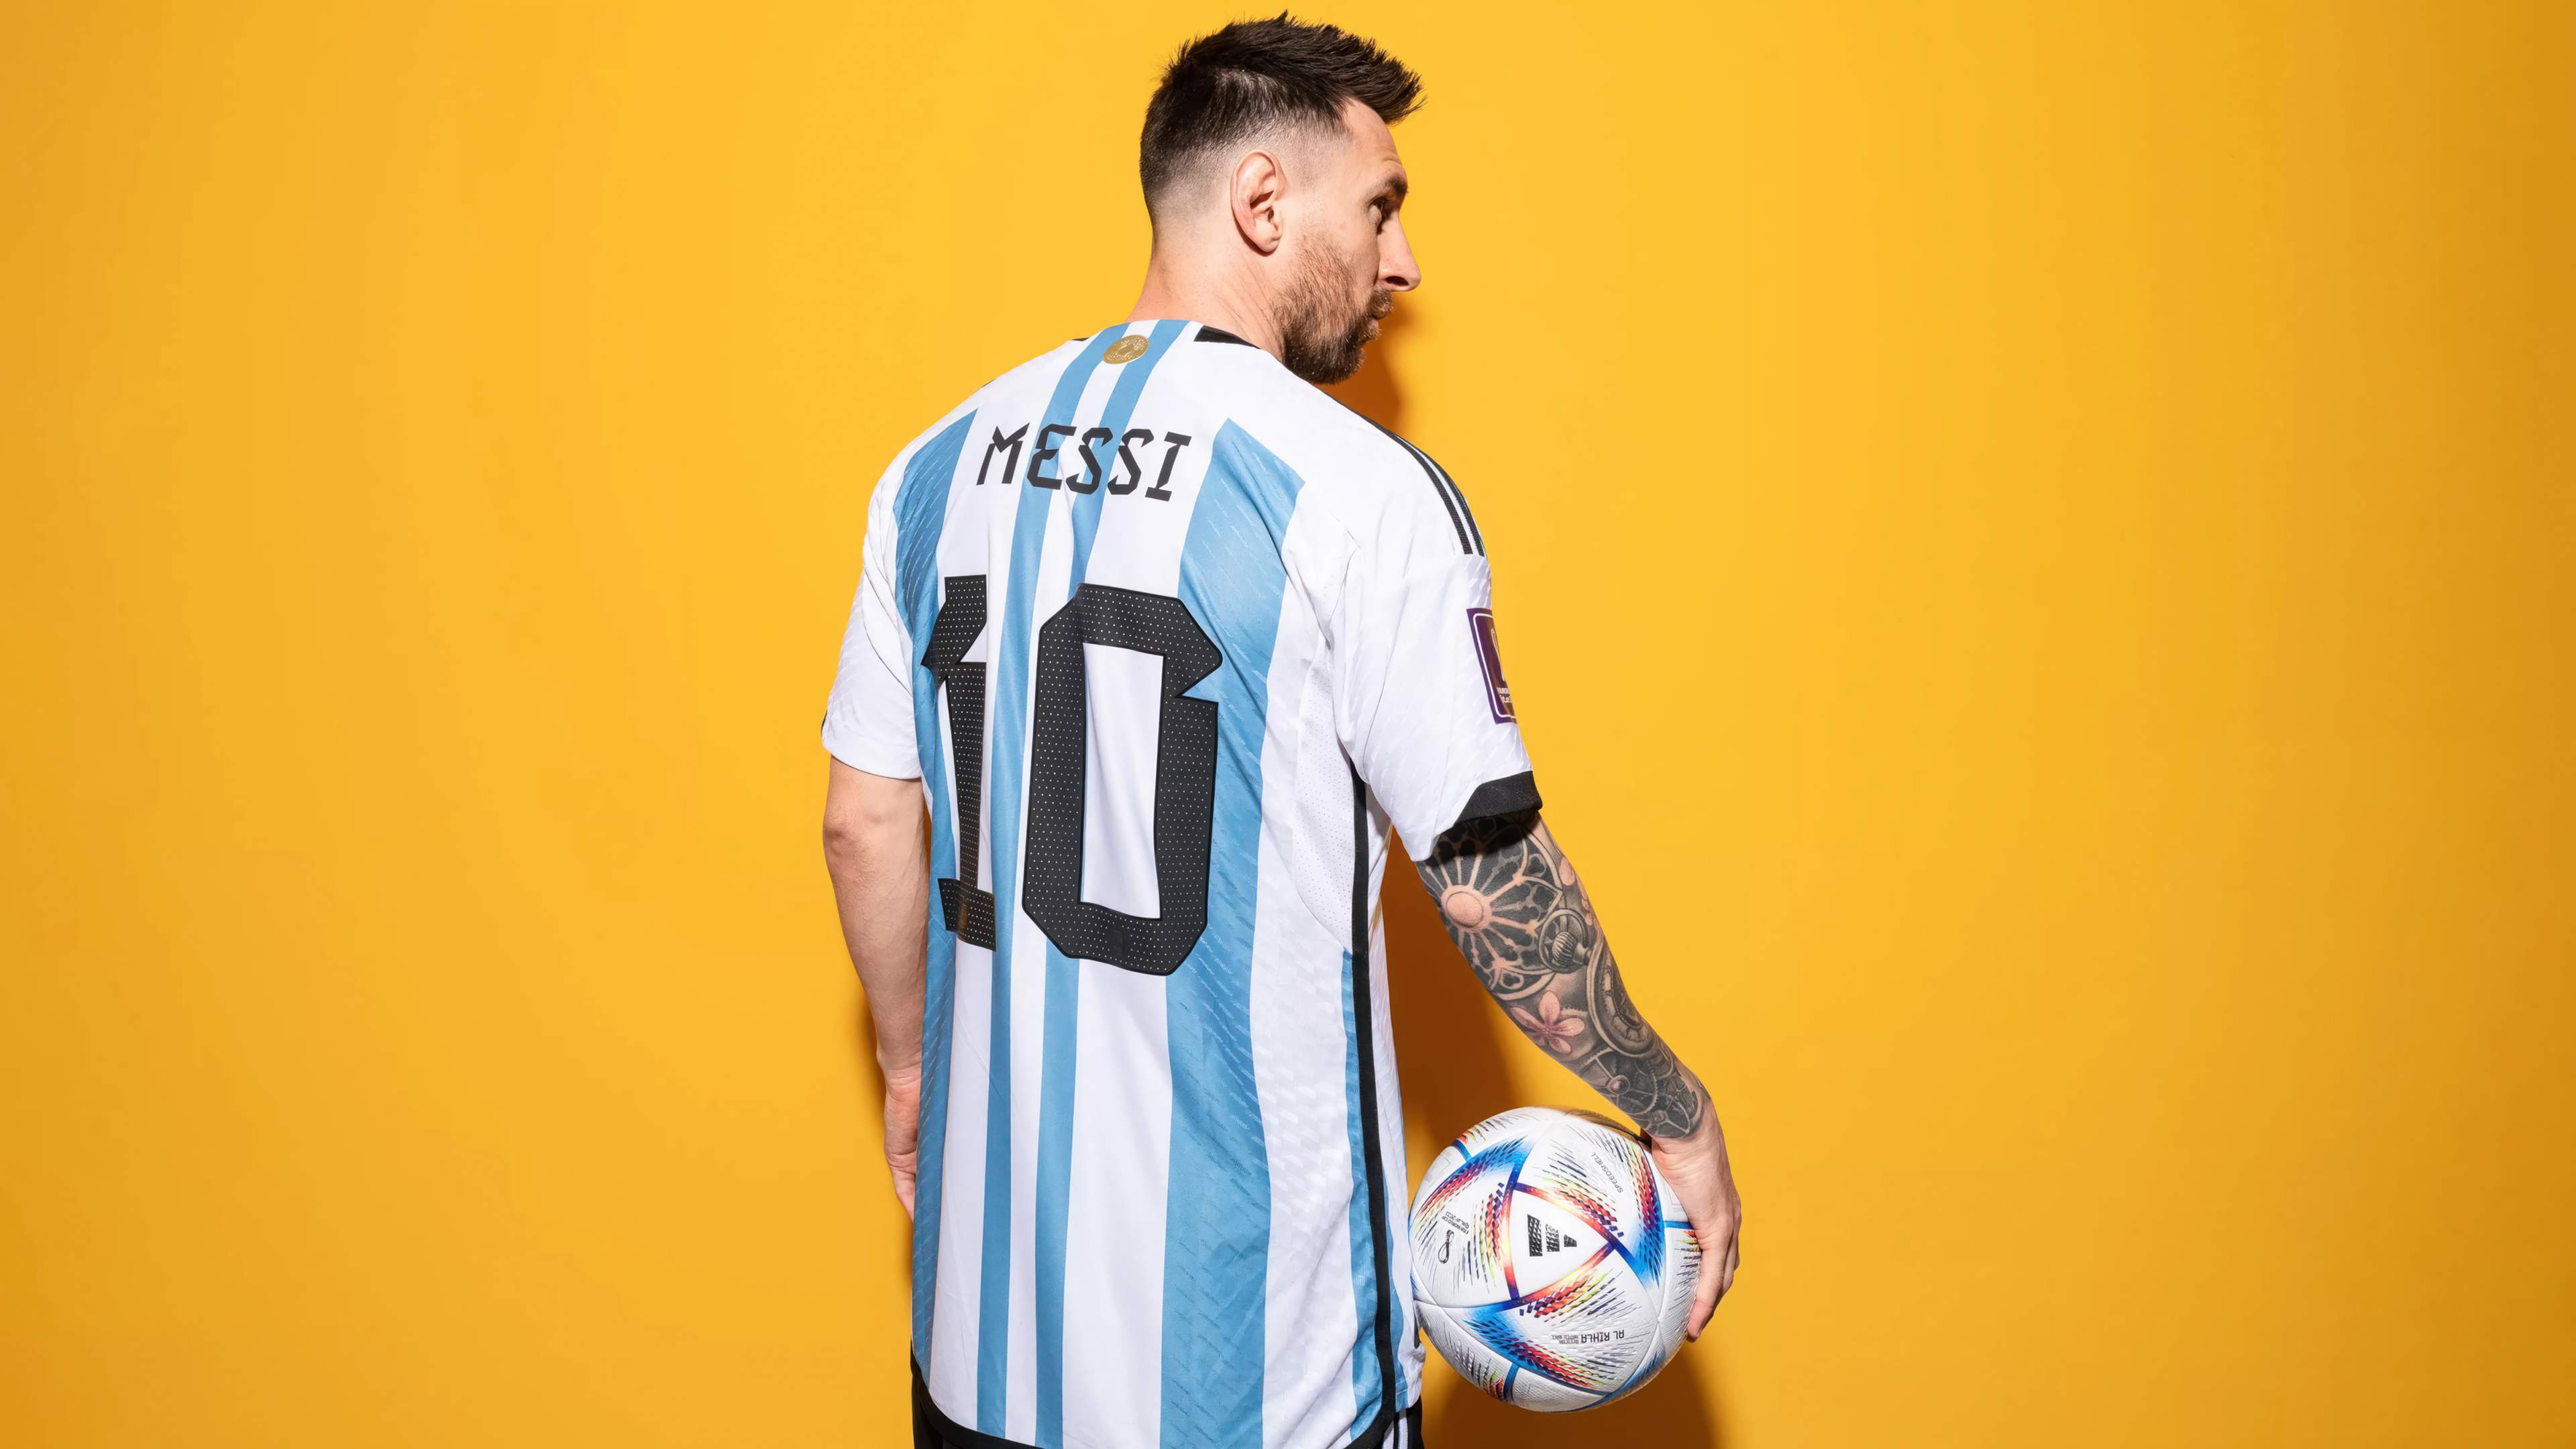 300+] Lionel Messi Wallpapers | Wallpapers.com